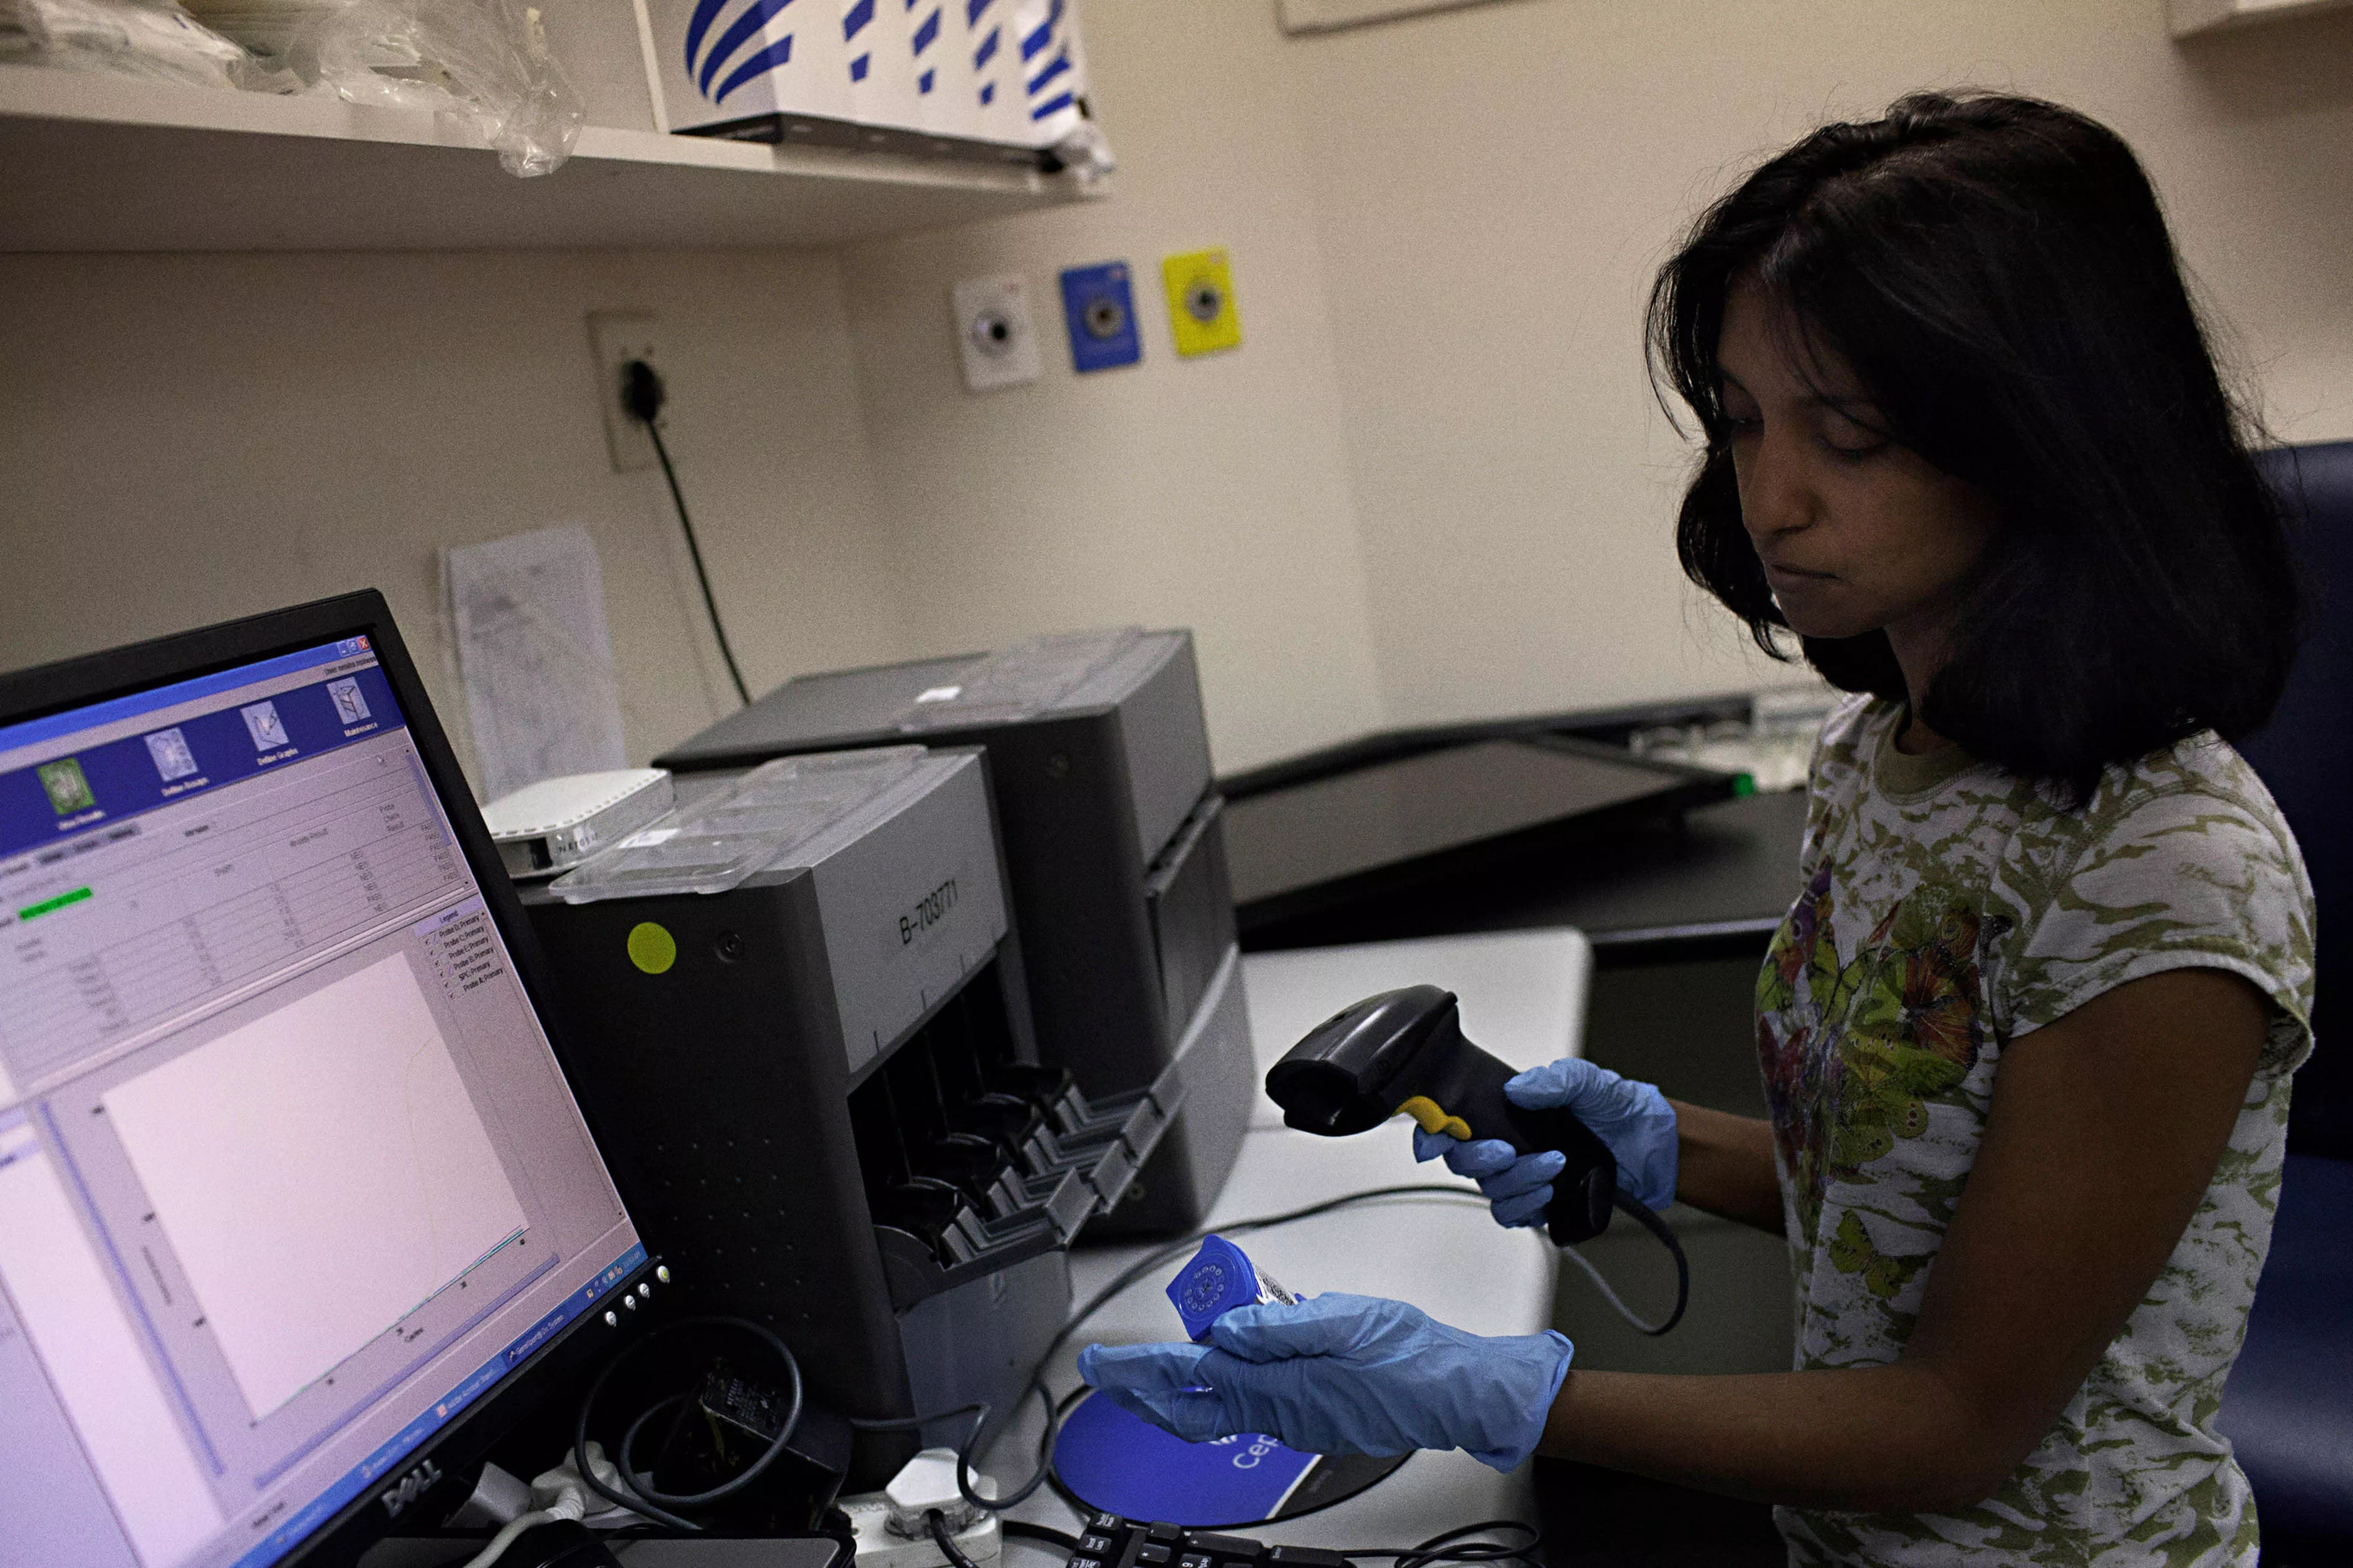 Medical officer, Neisha Mohess scans a sample of sputum for loading into the GeneXpert, an automated molecular TB diagnostic test machine.